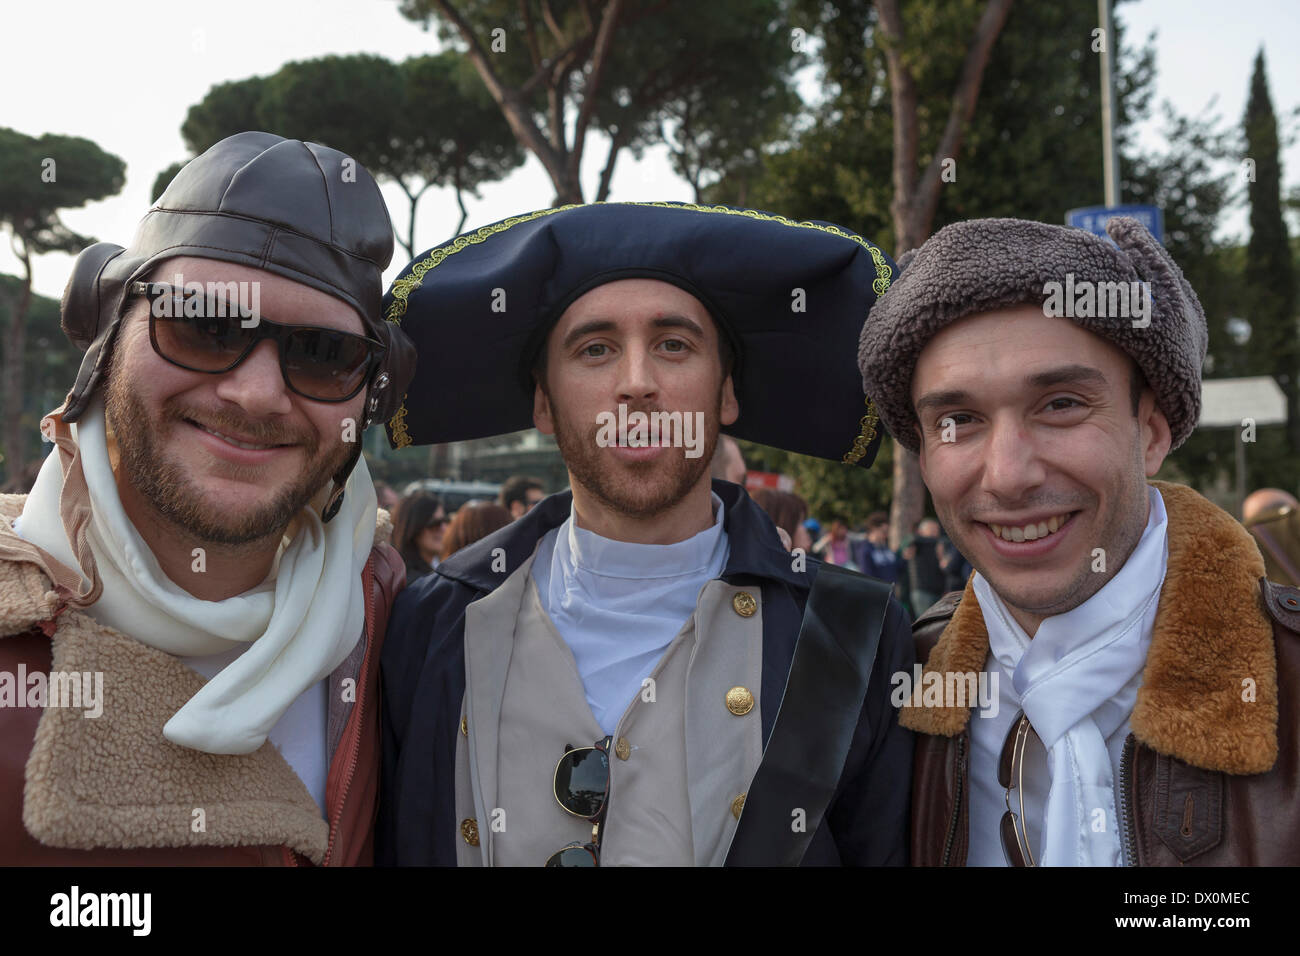 Italy v England. RBS 6 Nations rugby. , Rome, Italy, 3/15/14. England beat Italy by 52 points to 11 at the Stadio Olimpico. England fans from London dressed as Biggles and Nelson supporting England in Rome. Stock Photo